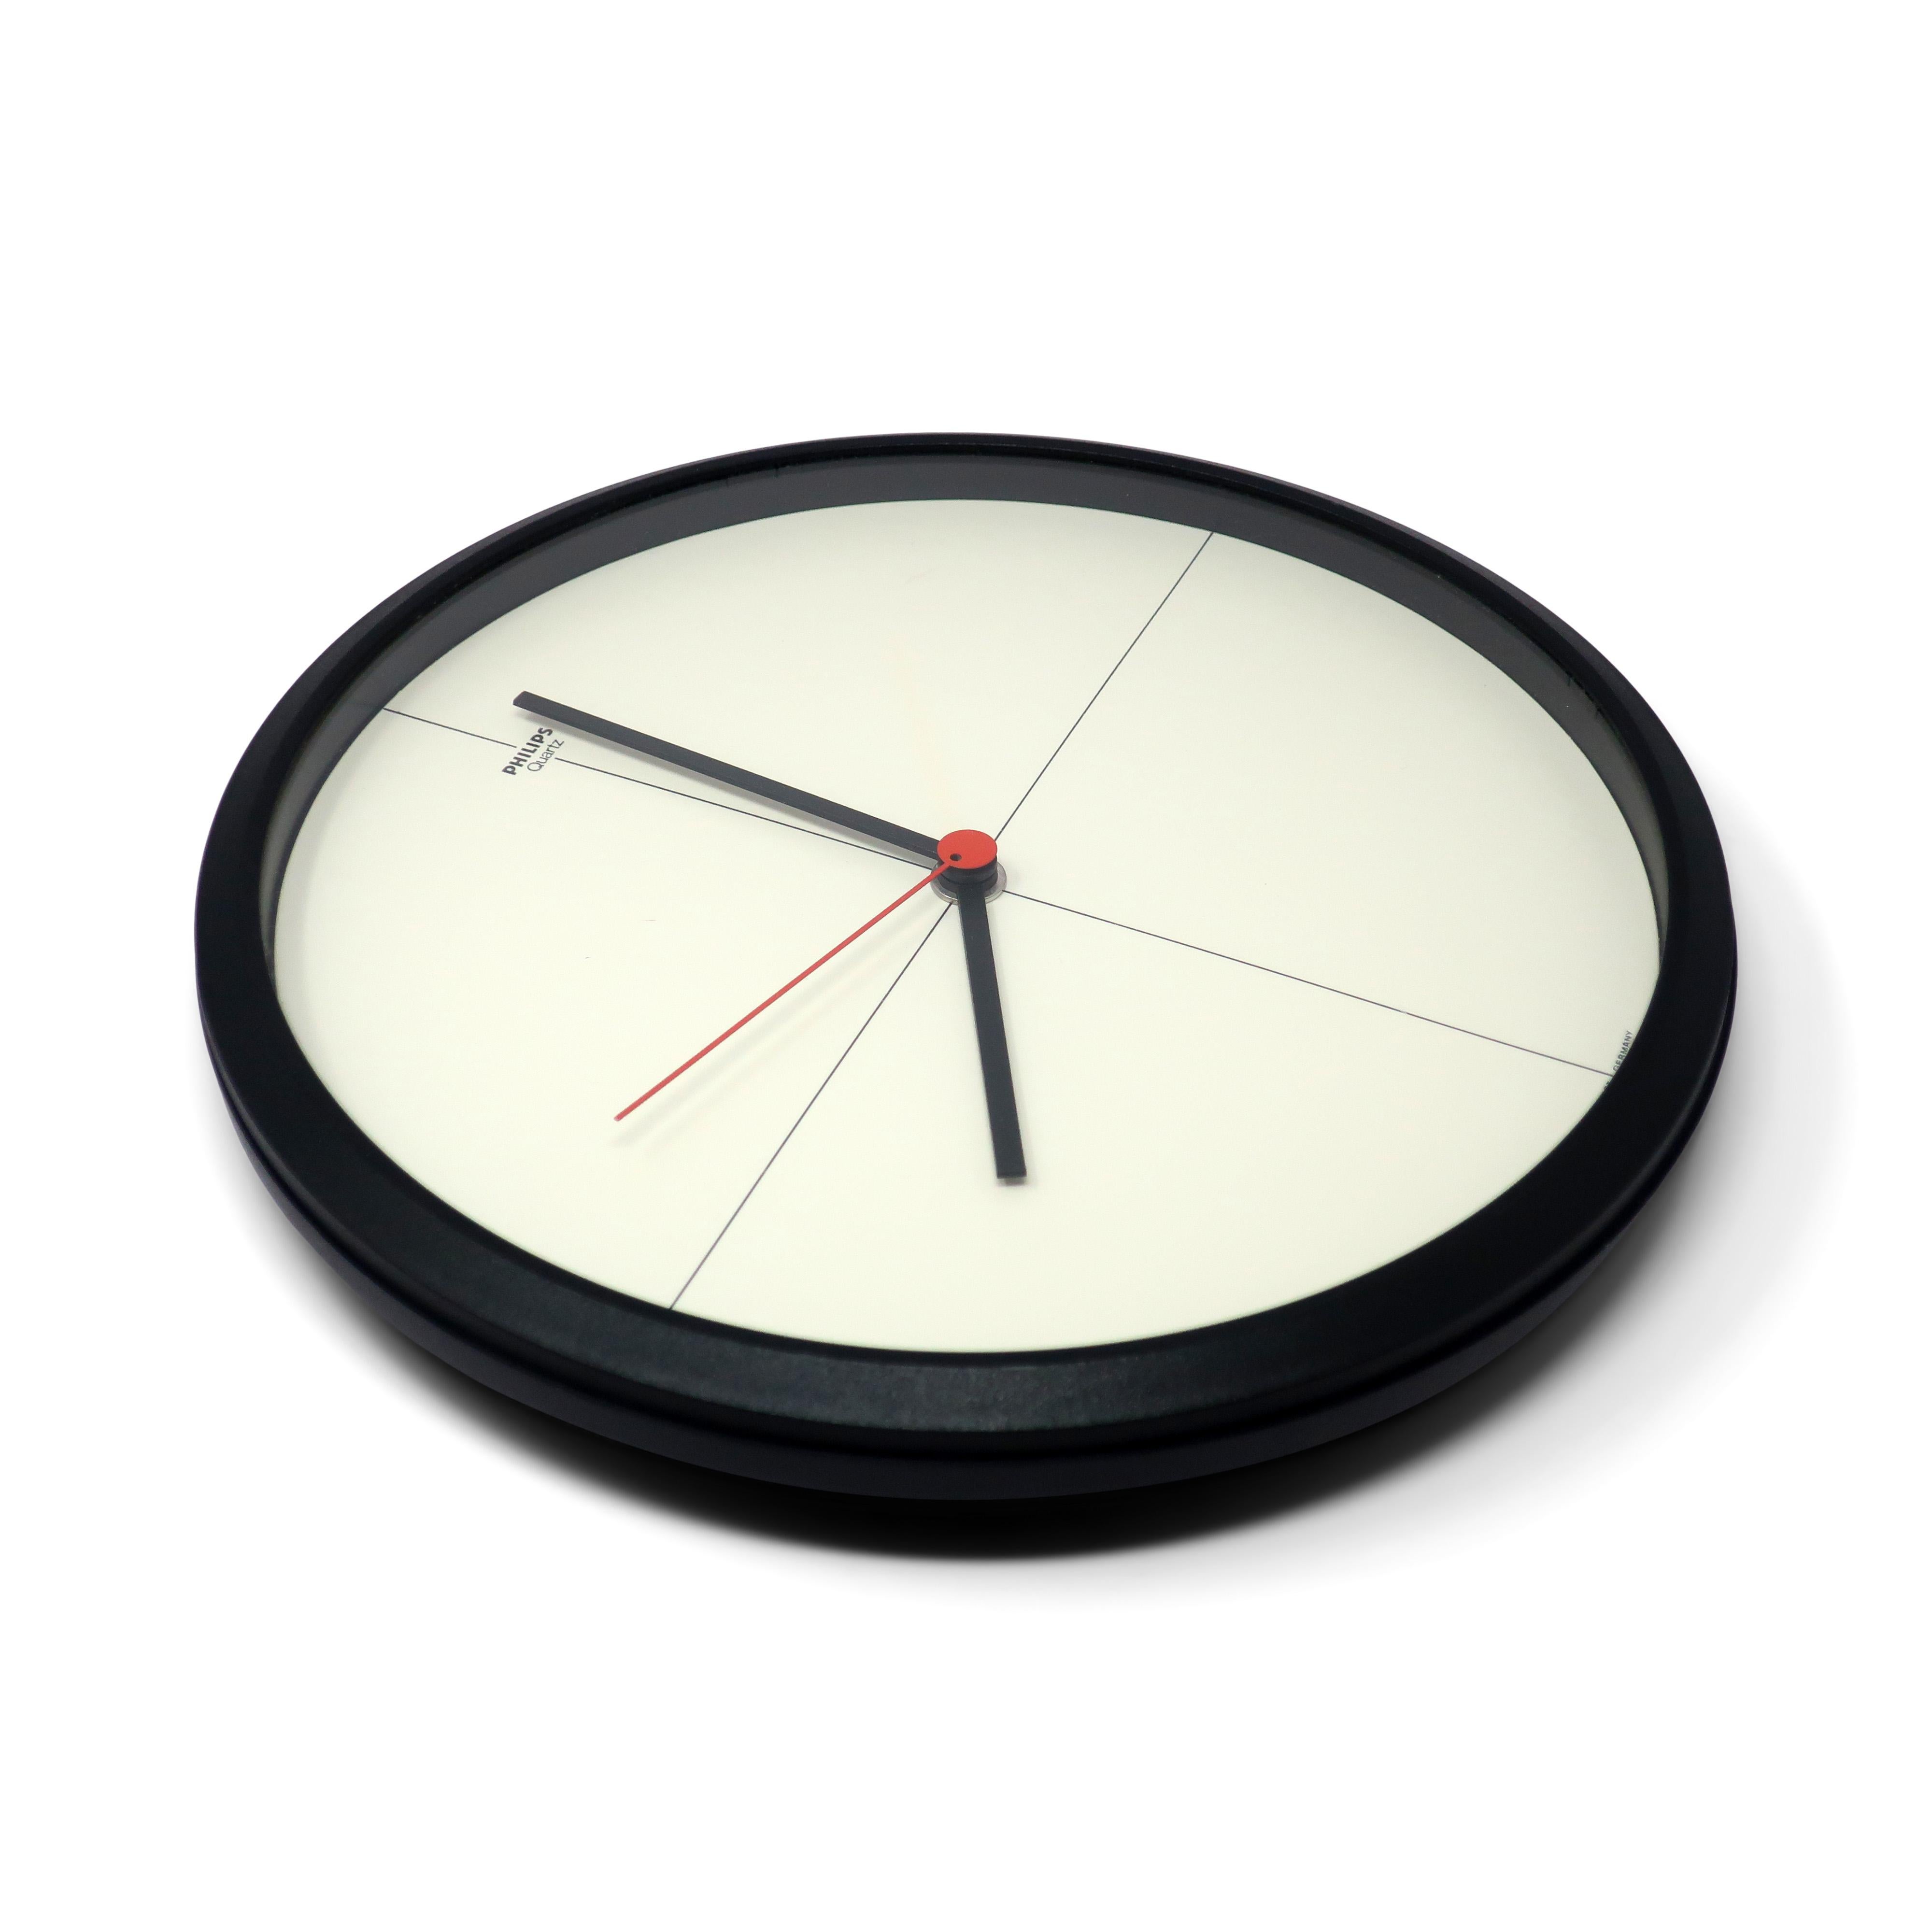 A minimalist postmodern Philips HR 5676 wall clock with all of the best of 1980s design: black case, white face, black and red hands, and a cross through the center point that creates lines at 3, 6, 9, and 12 o'clock. Made in West Germany, so you